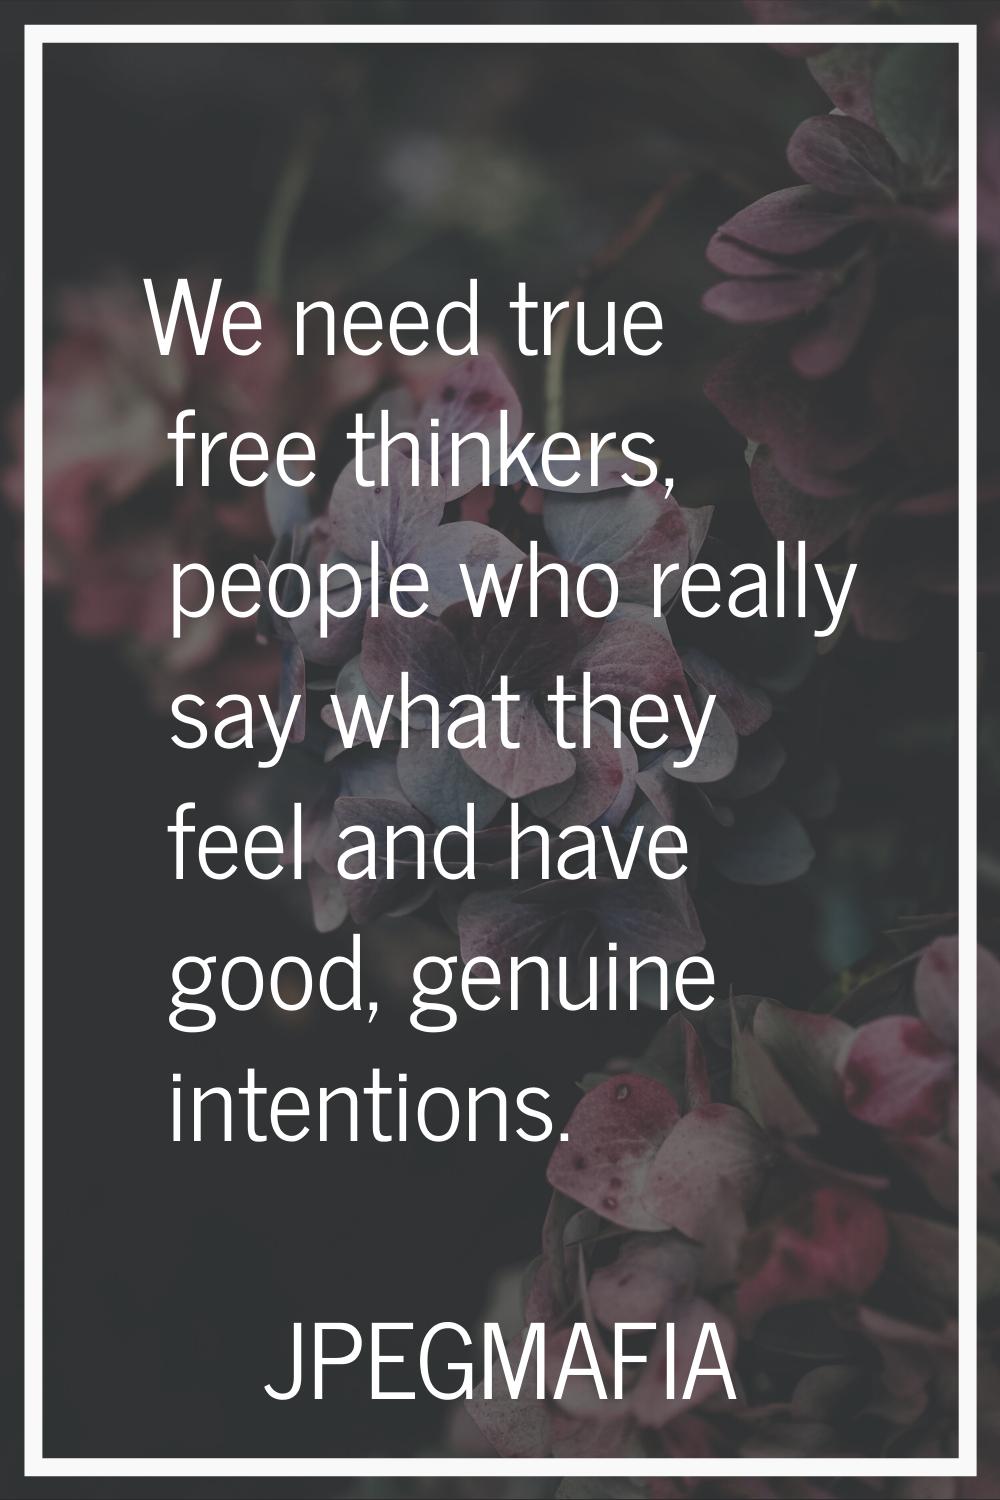 We need true free thinkers, people who really say what they feel and have good, genuine intentions.